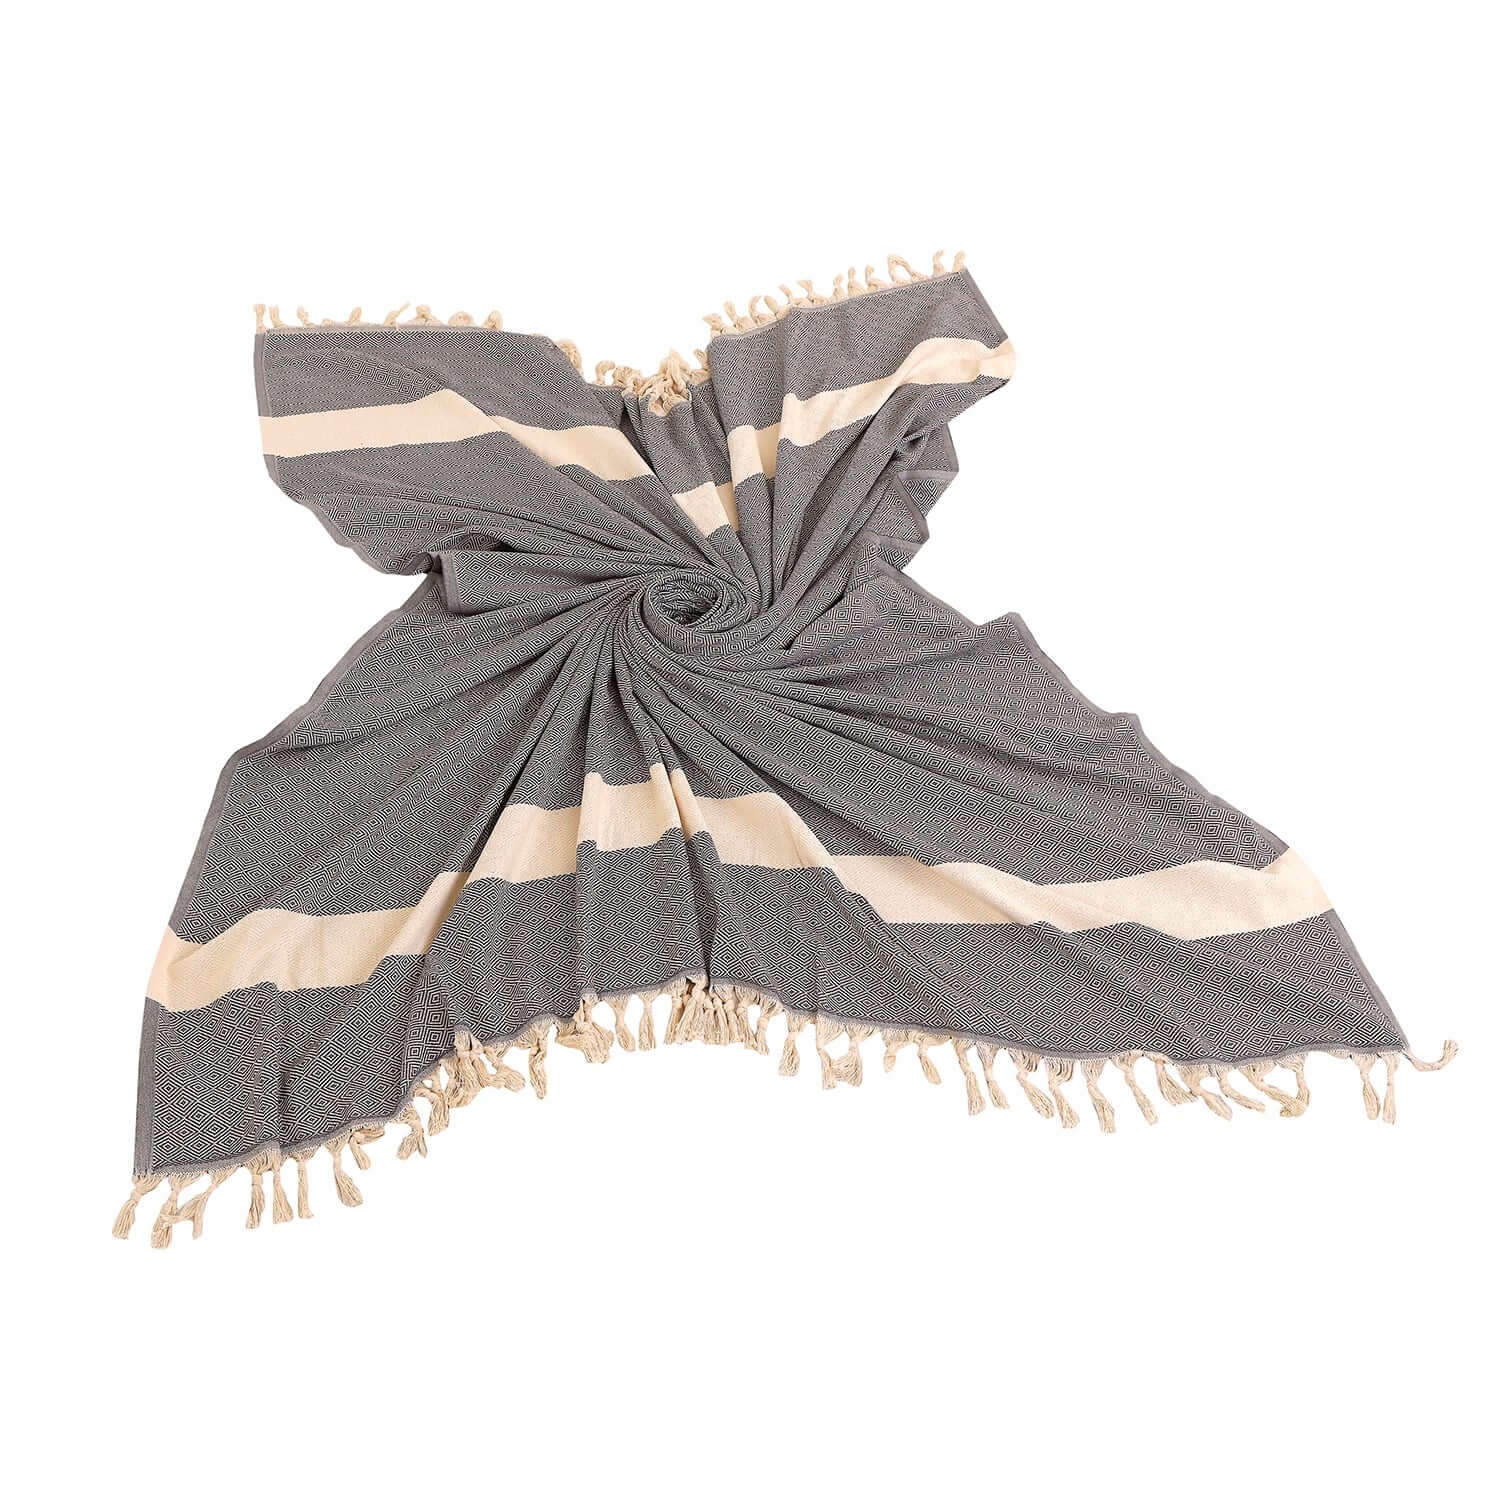 Loom Legacy grey and beige striped cotton blanket elegantly knotted with fringe ends